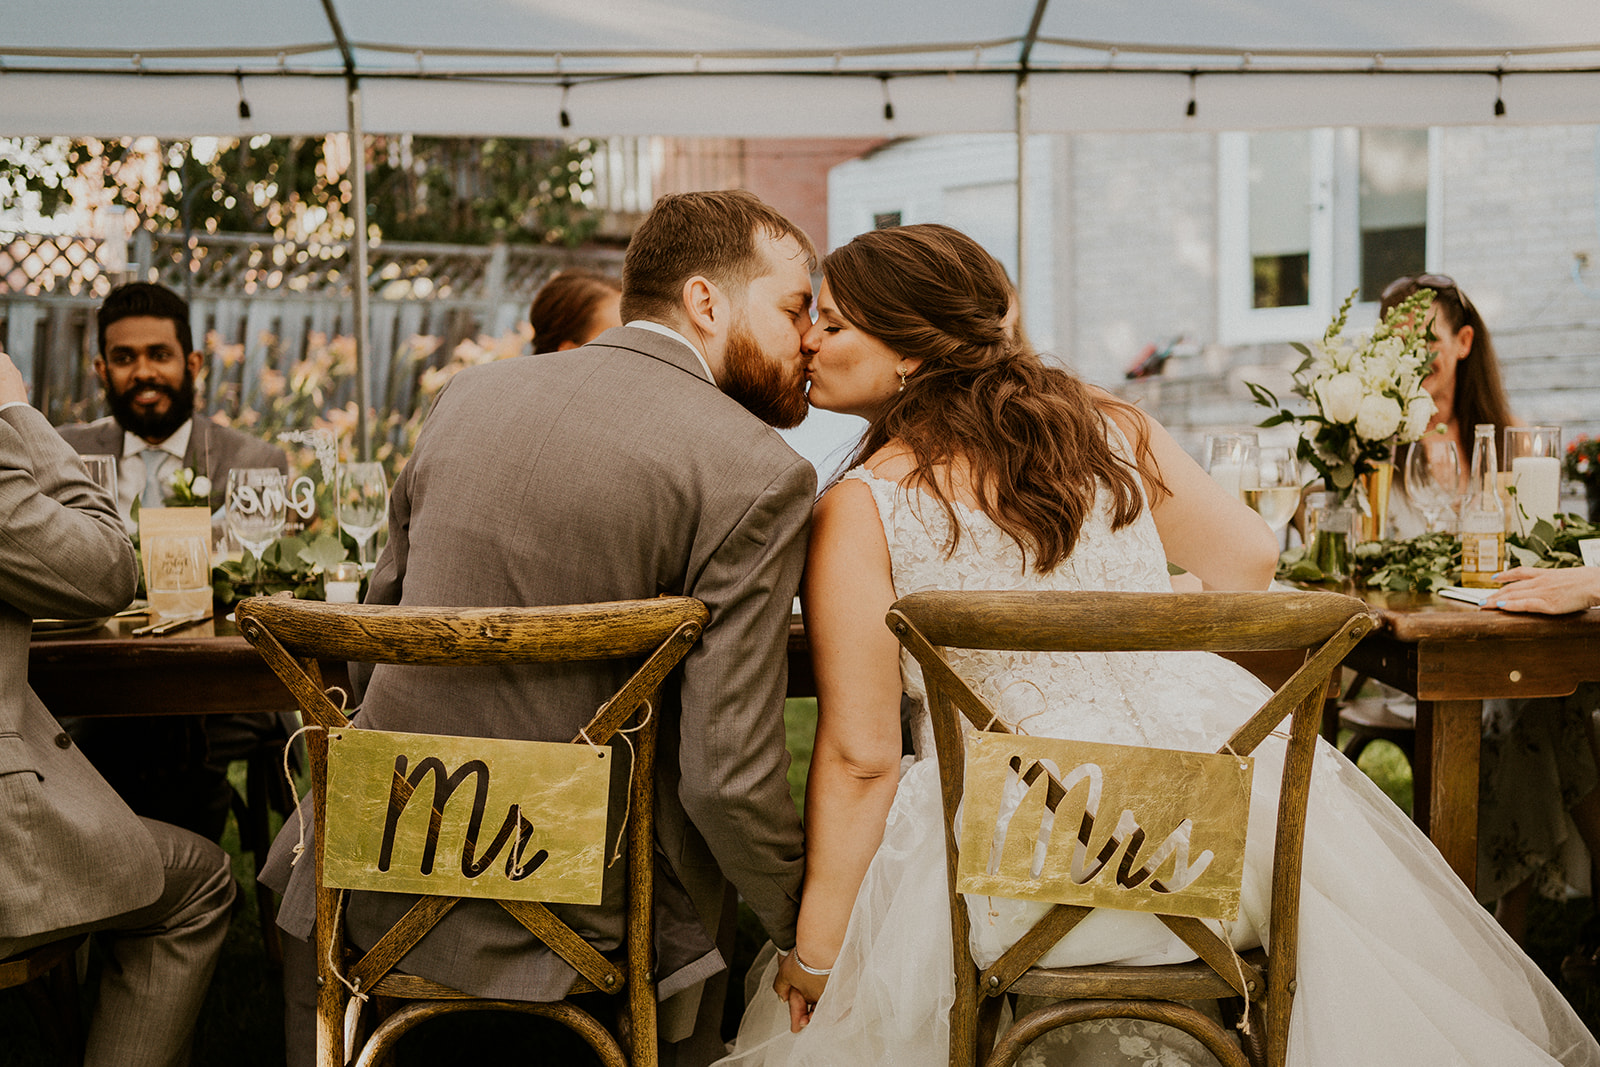 Alana and Shawn kissing during their reception